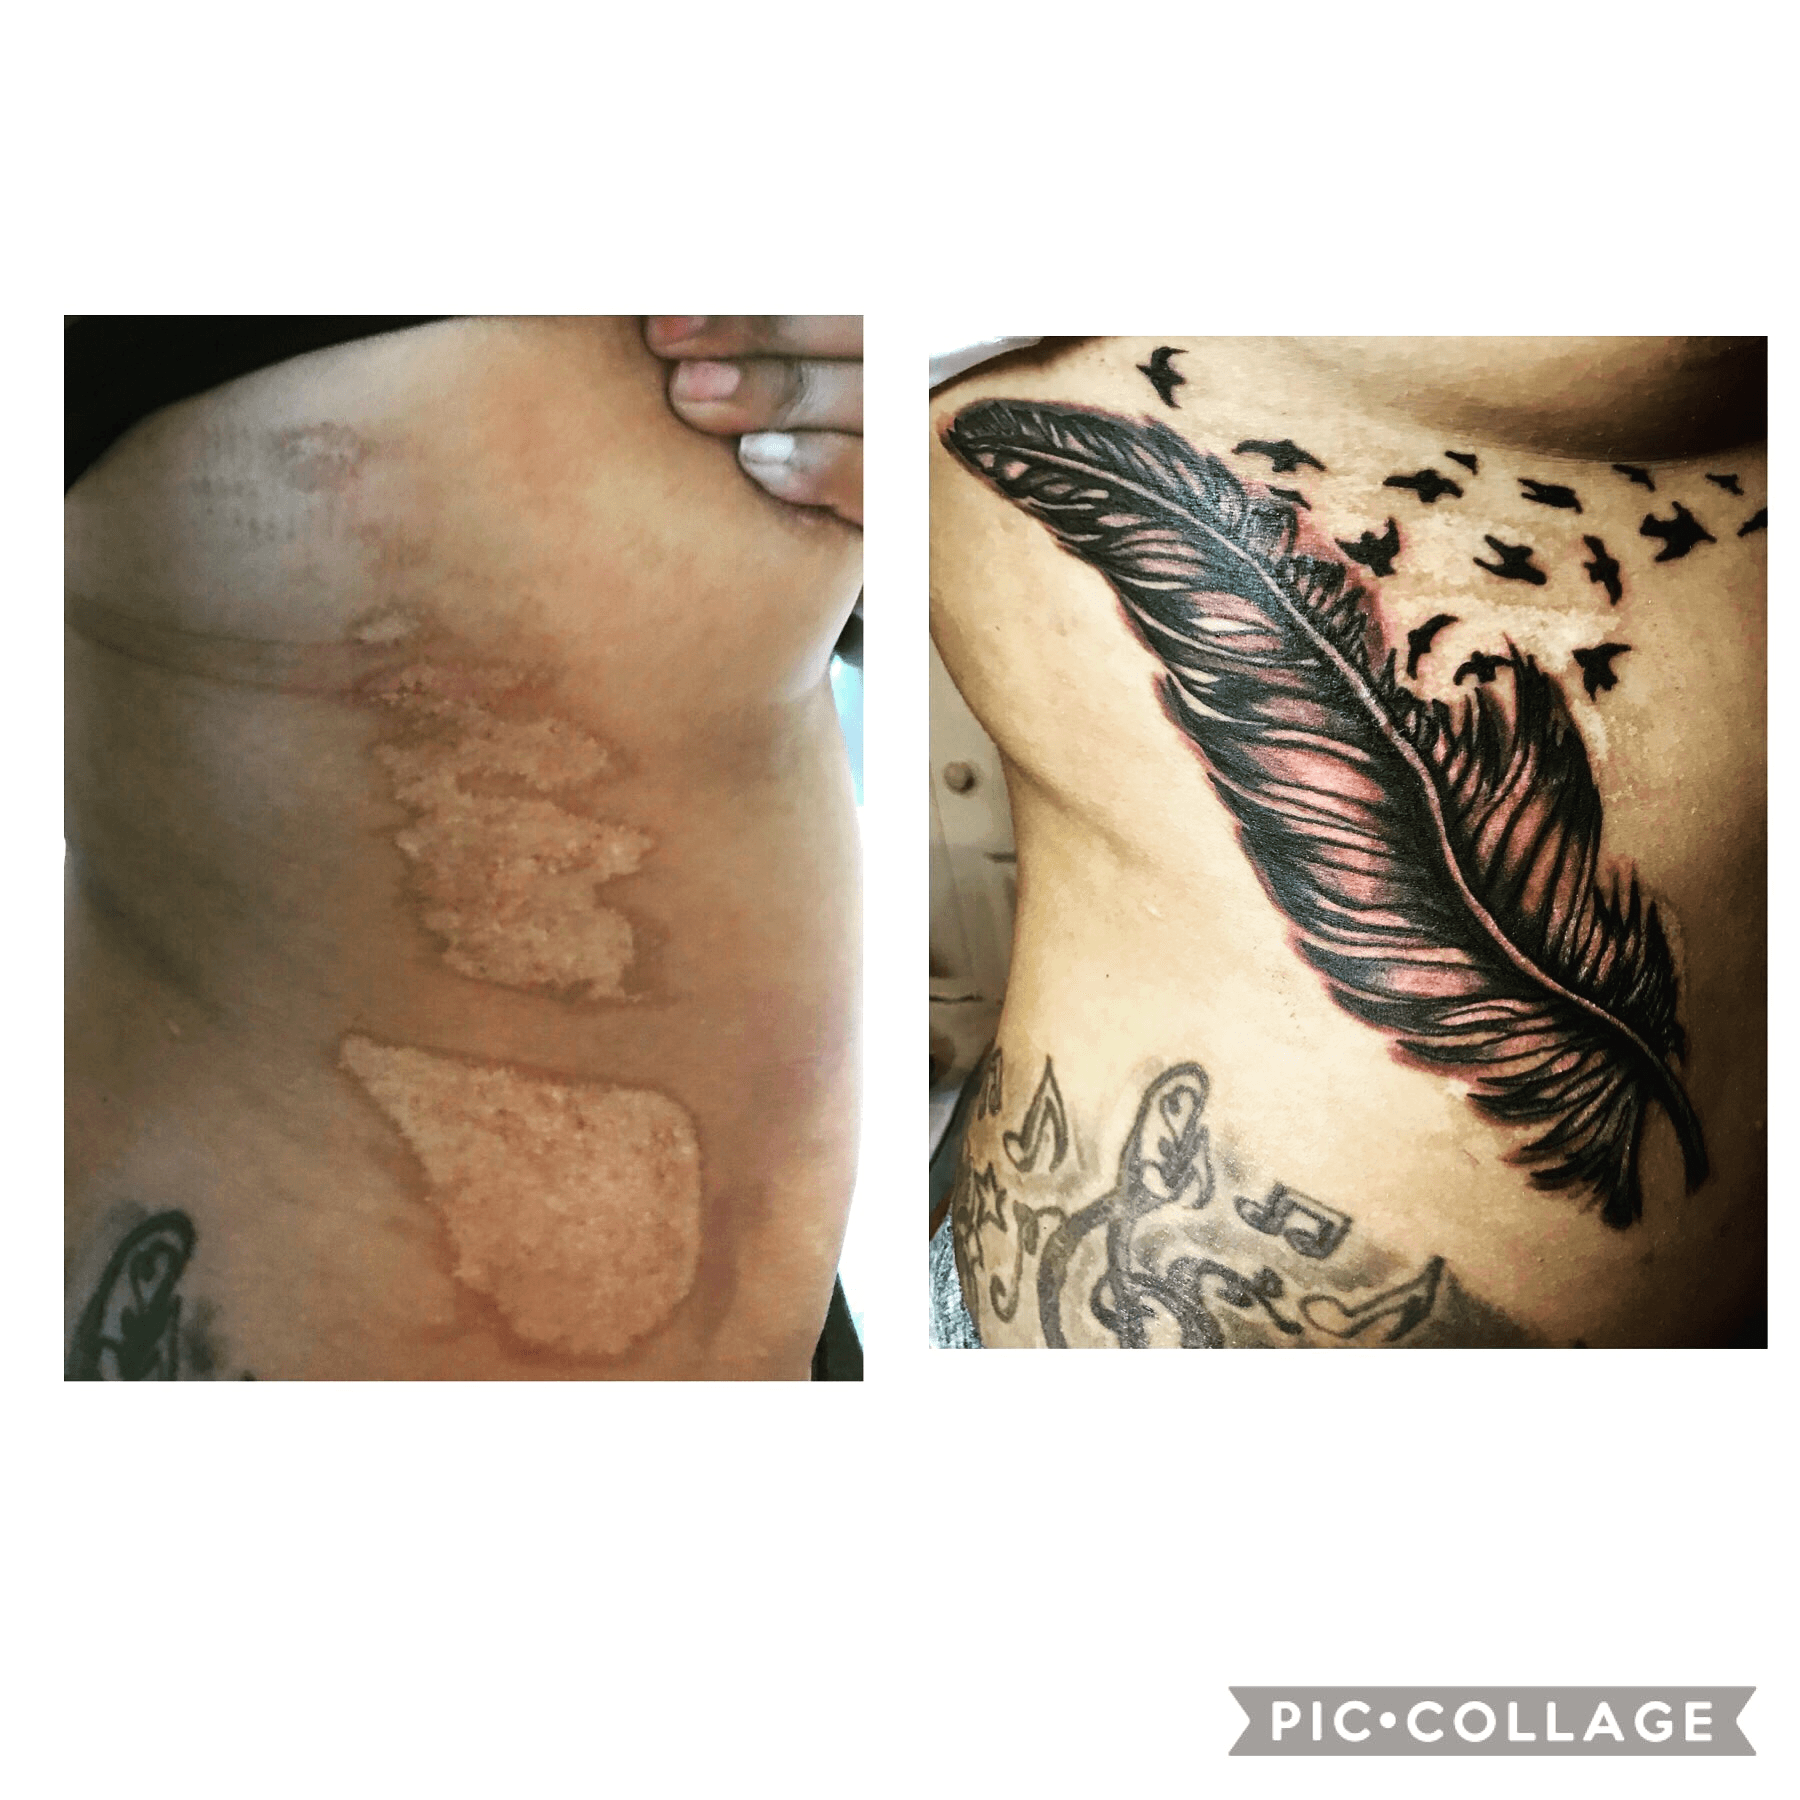 Top 5 scar coverup tattoos done at Black Pearl Ink Mumbai